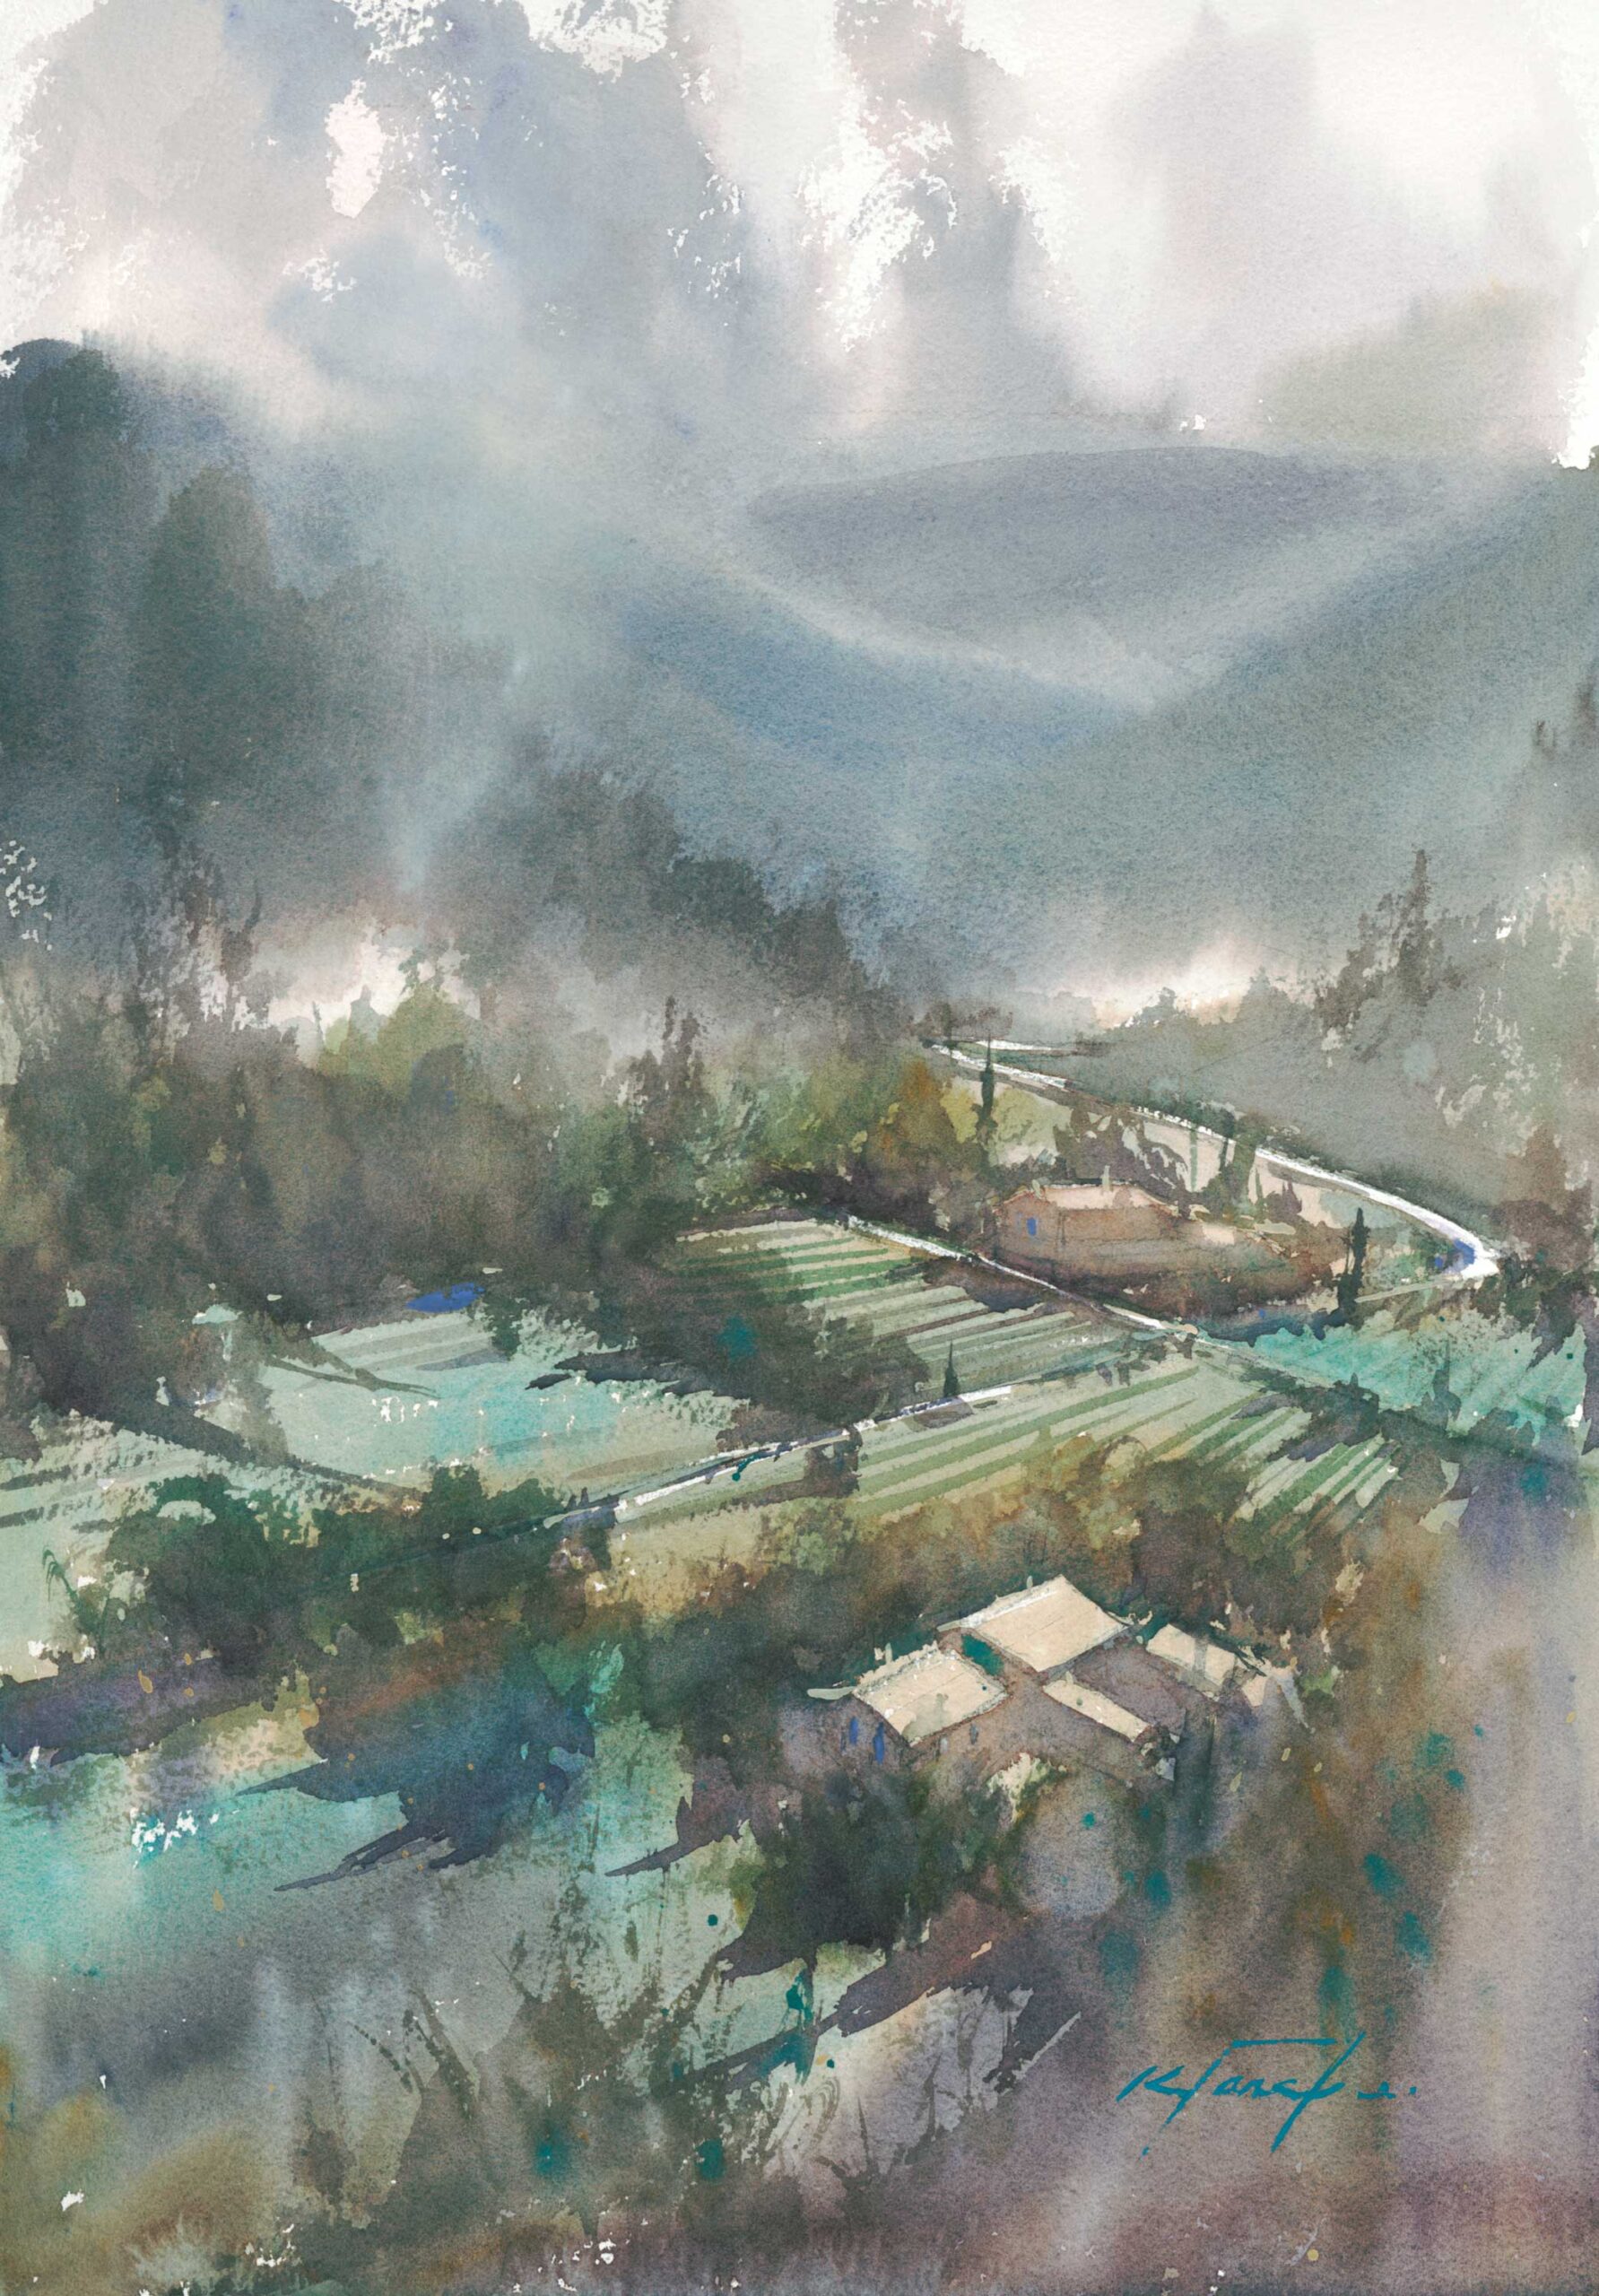 Keiko Tanabe, "Before the Storm, Venasque, France," 2015, watercolor, 20 x 14 in., Collection the artist, Plein air